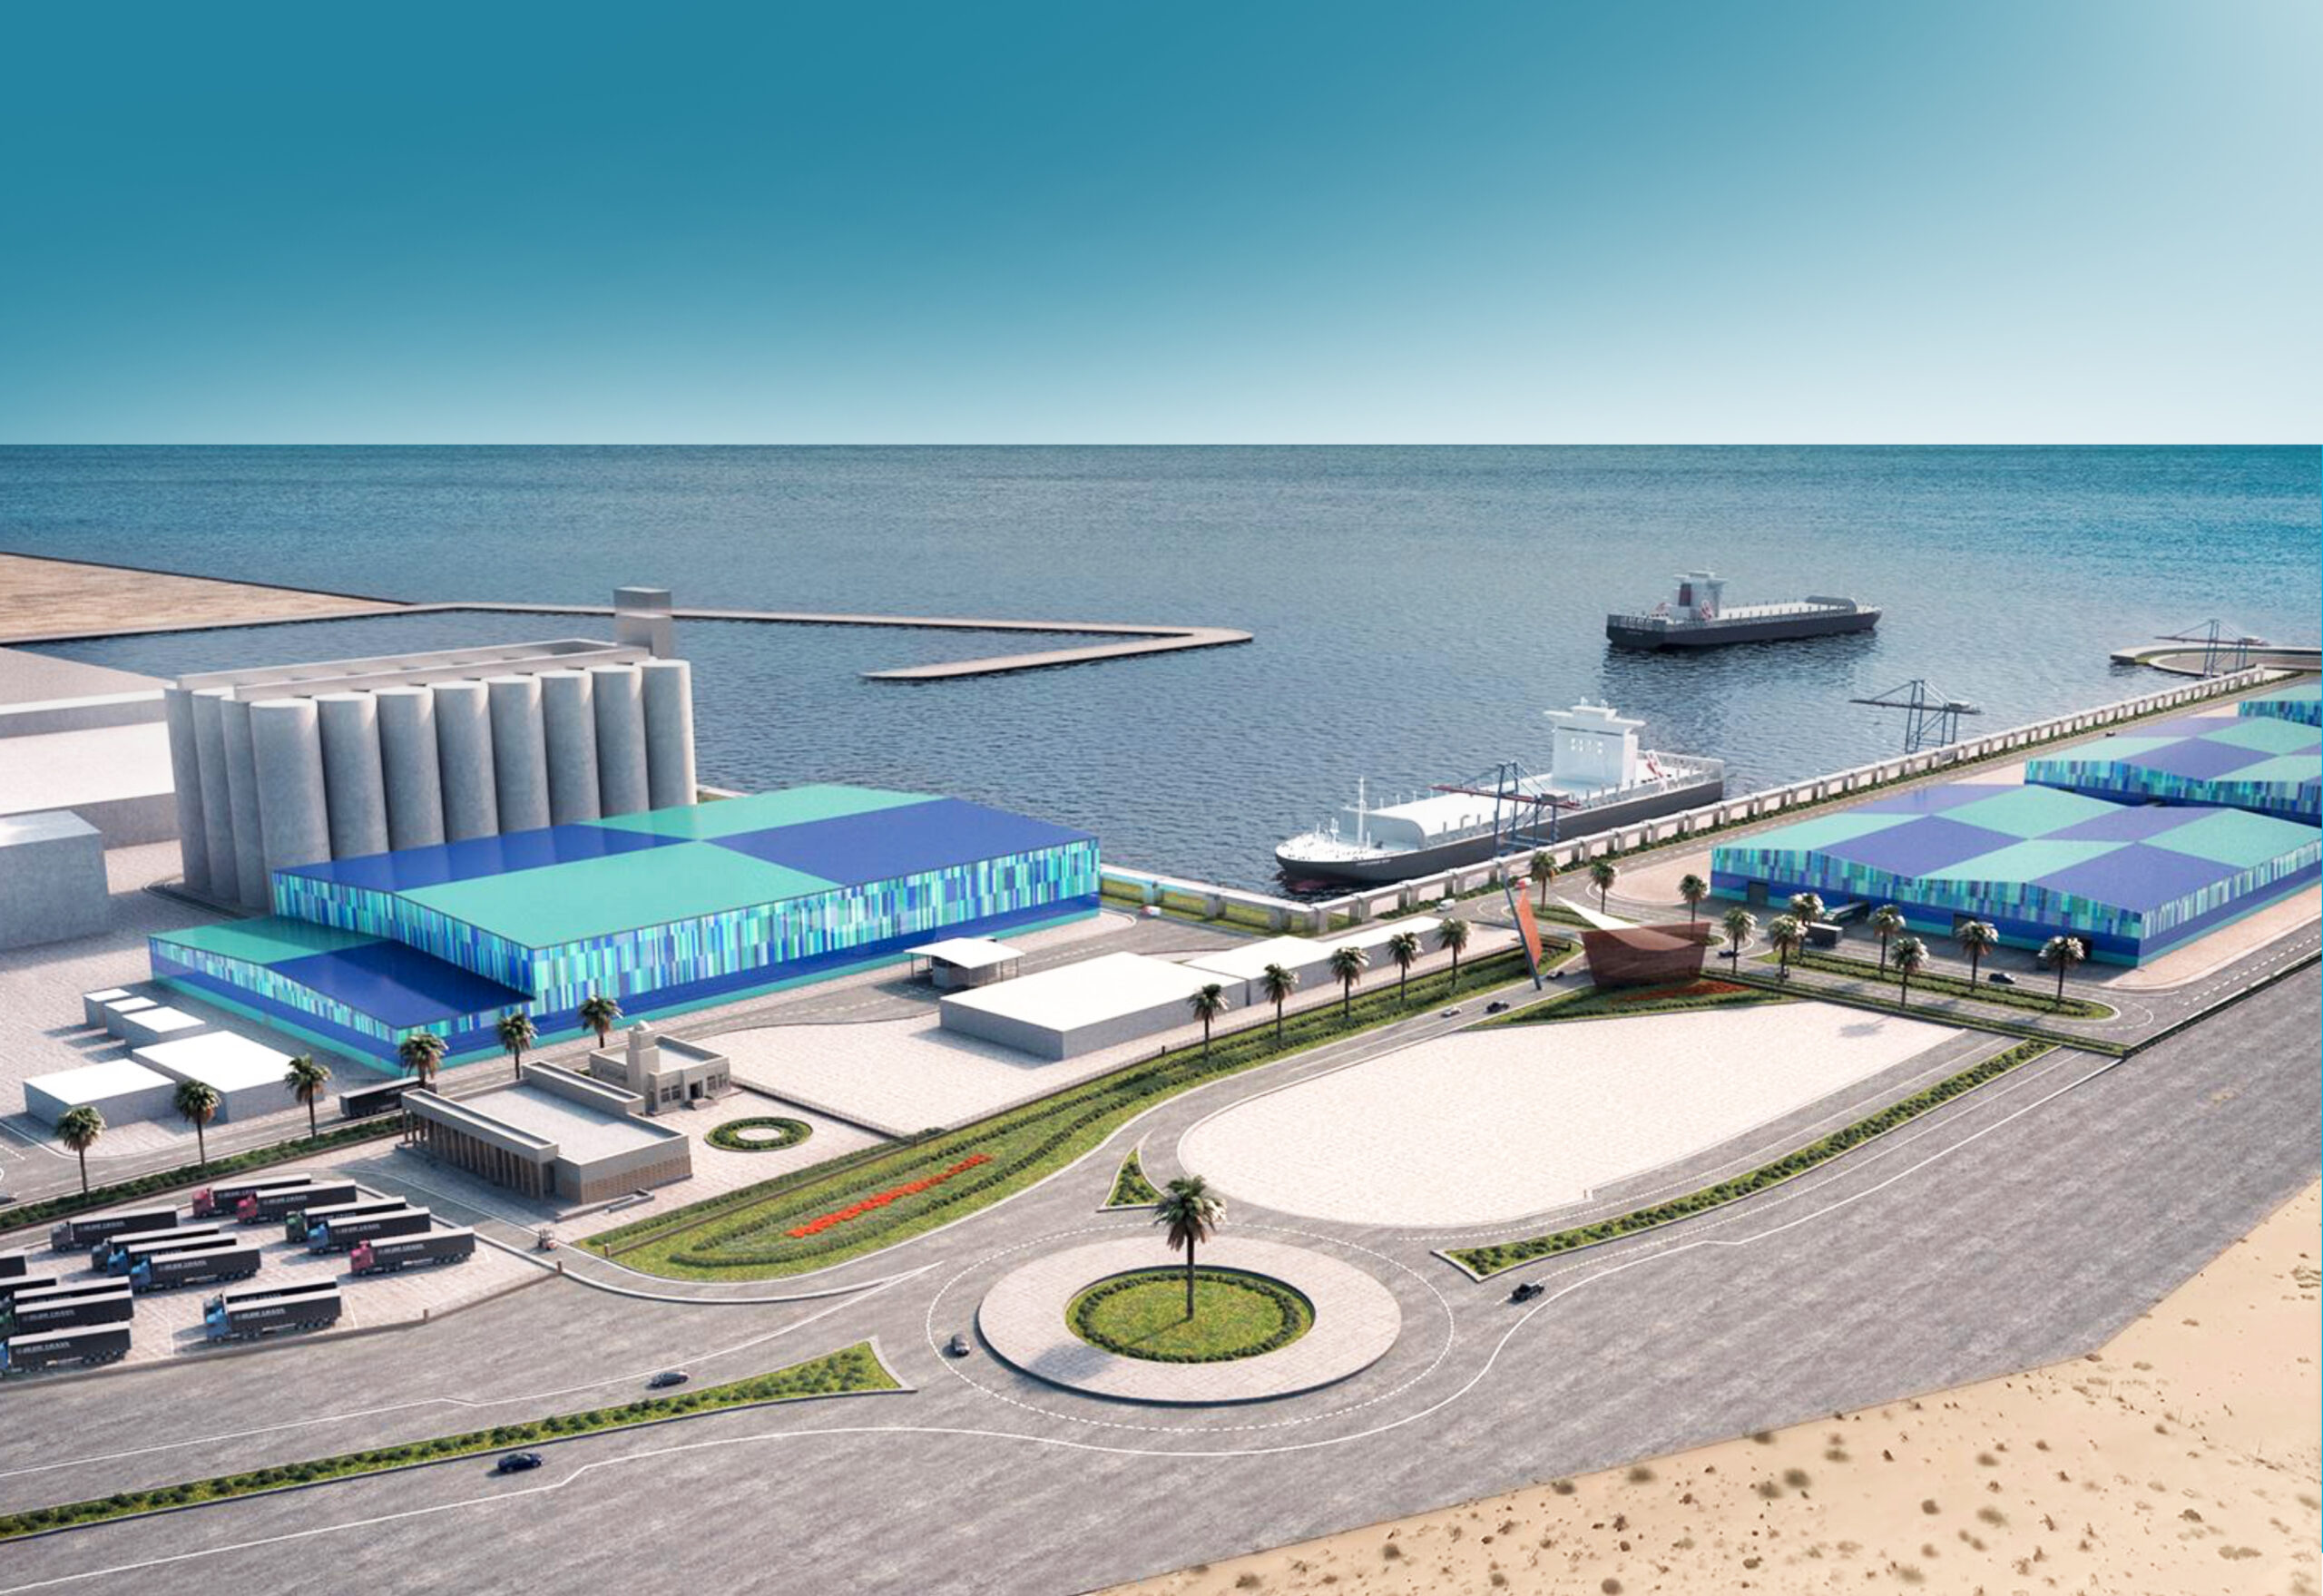 BIM model of SFSF project for ALJABER ENGINEERING in Qatar New Doha Port with a total area of 53 hectares, year 2020